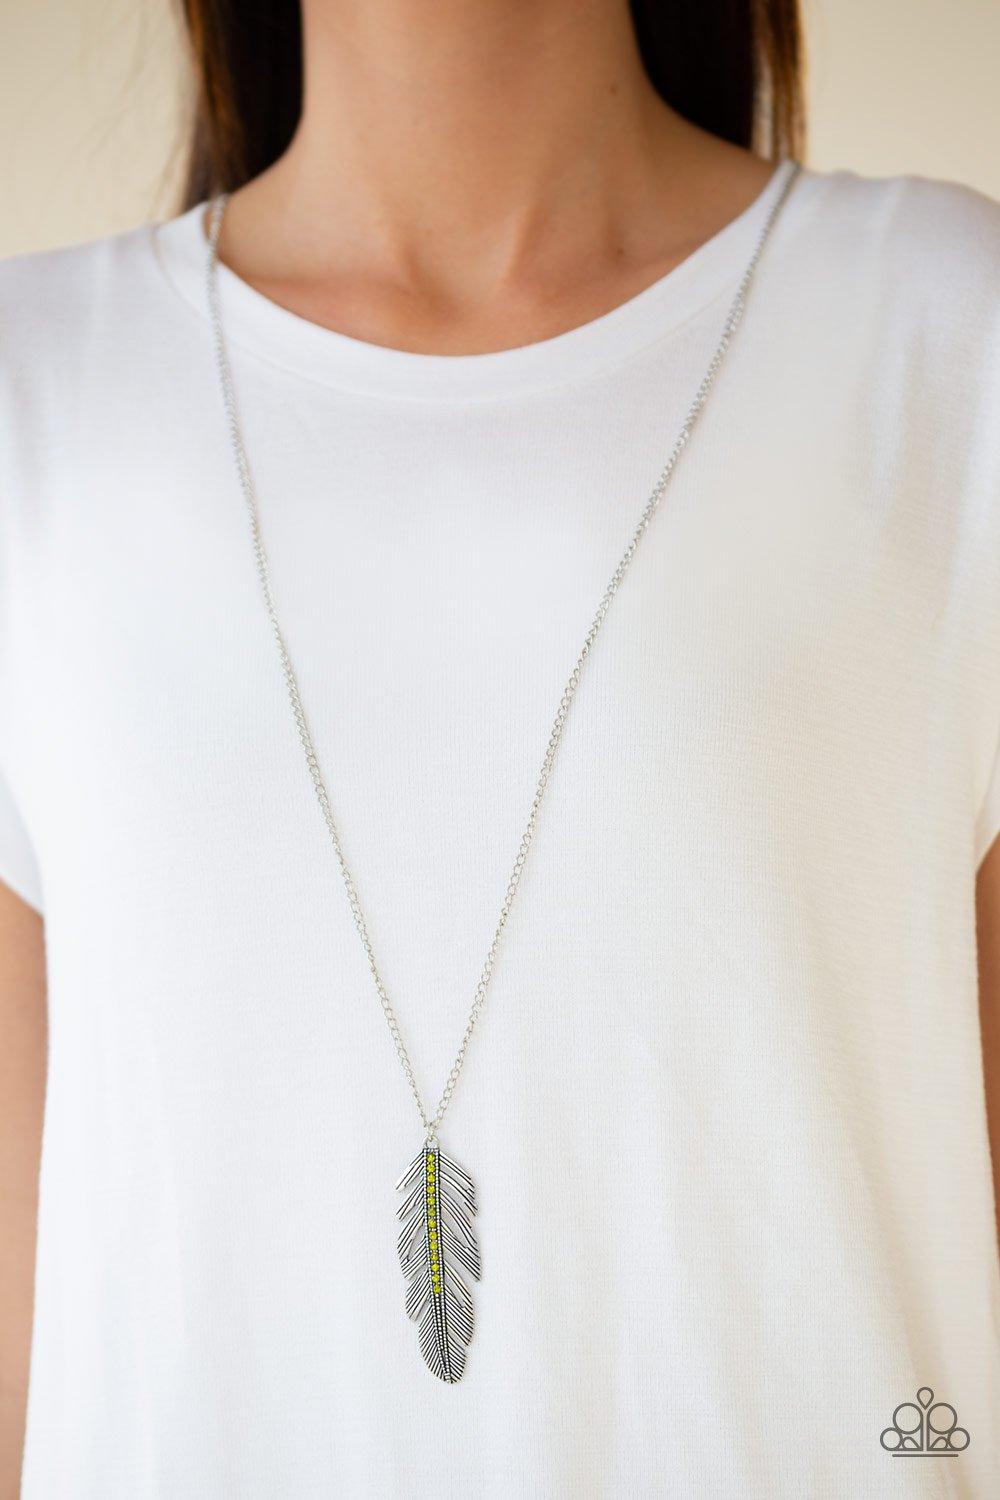 Paparazzi Accessories-Sky Quest - Green Necklace - jewelrybybretta